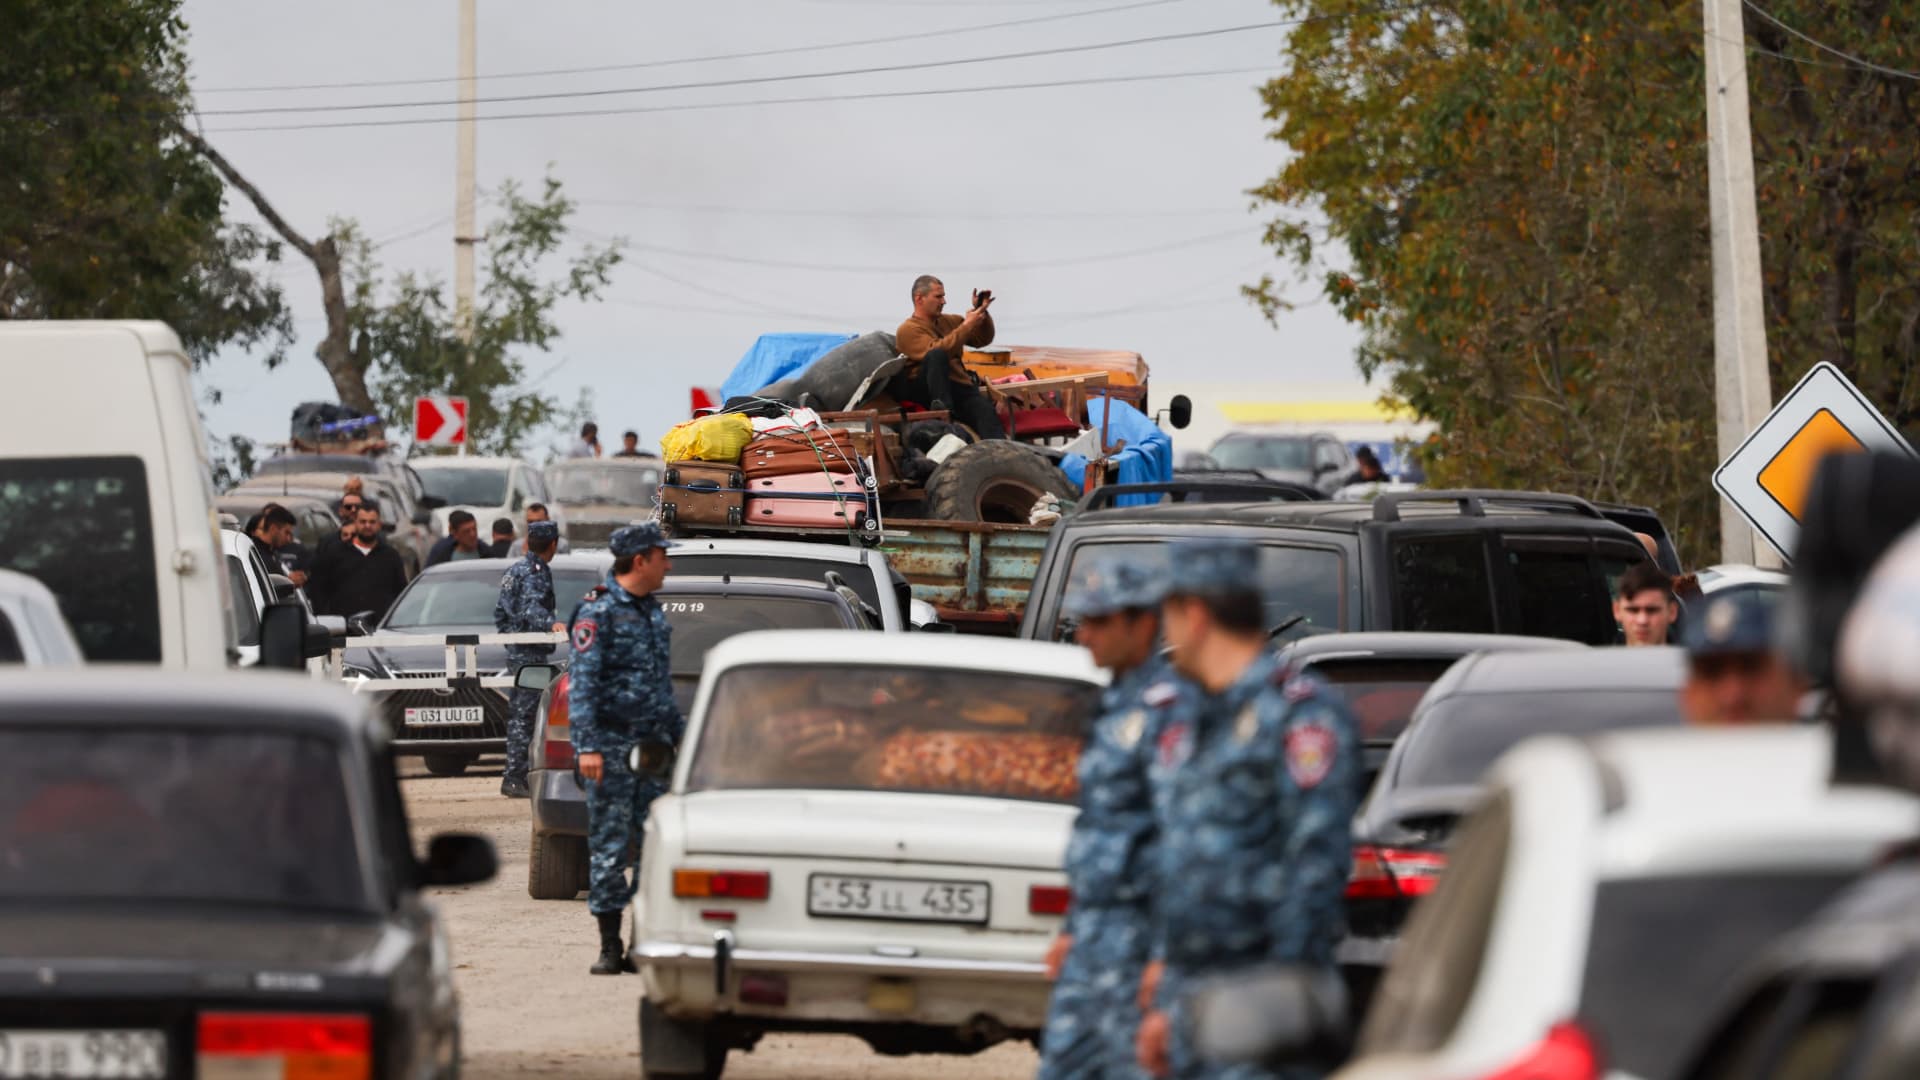 Armenia warns of ‘ethnic cleansing’ as countless numbers flee the Nagorno-Karabakh enclave